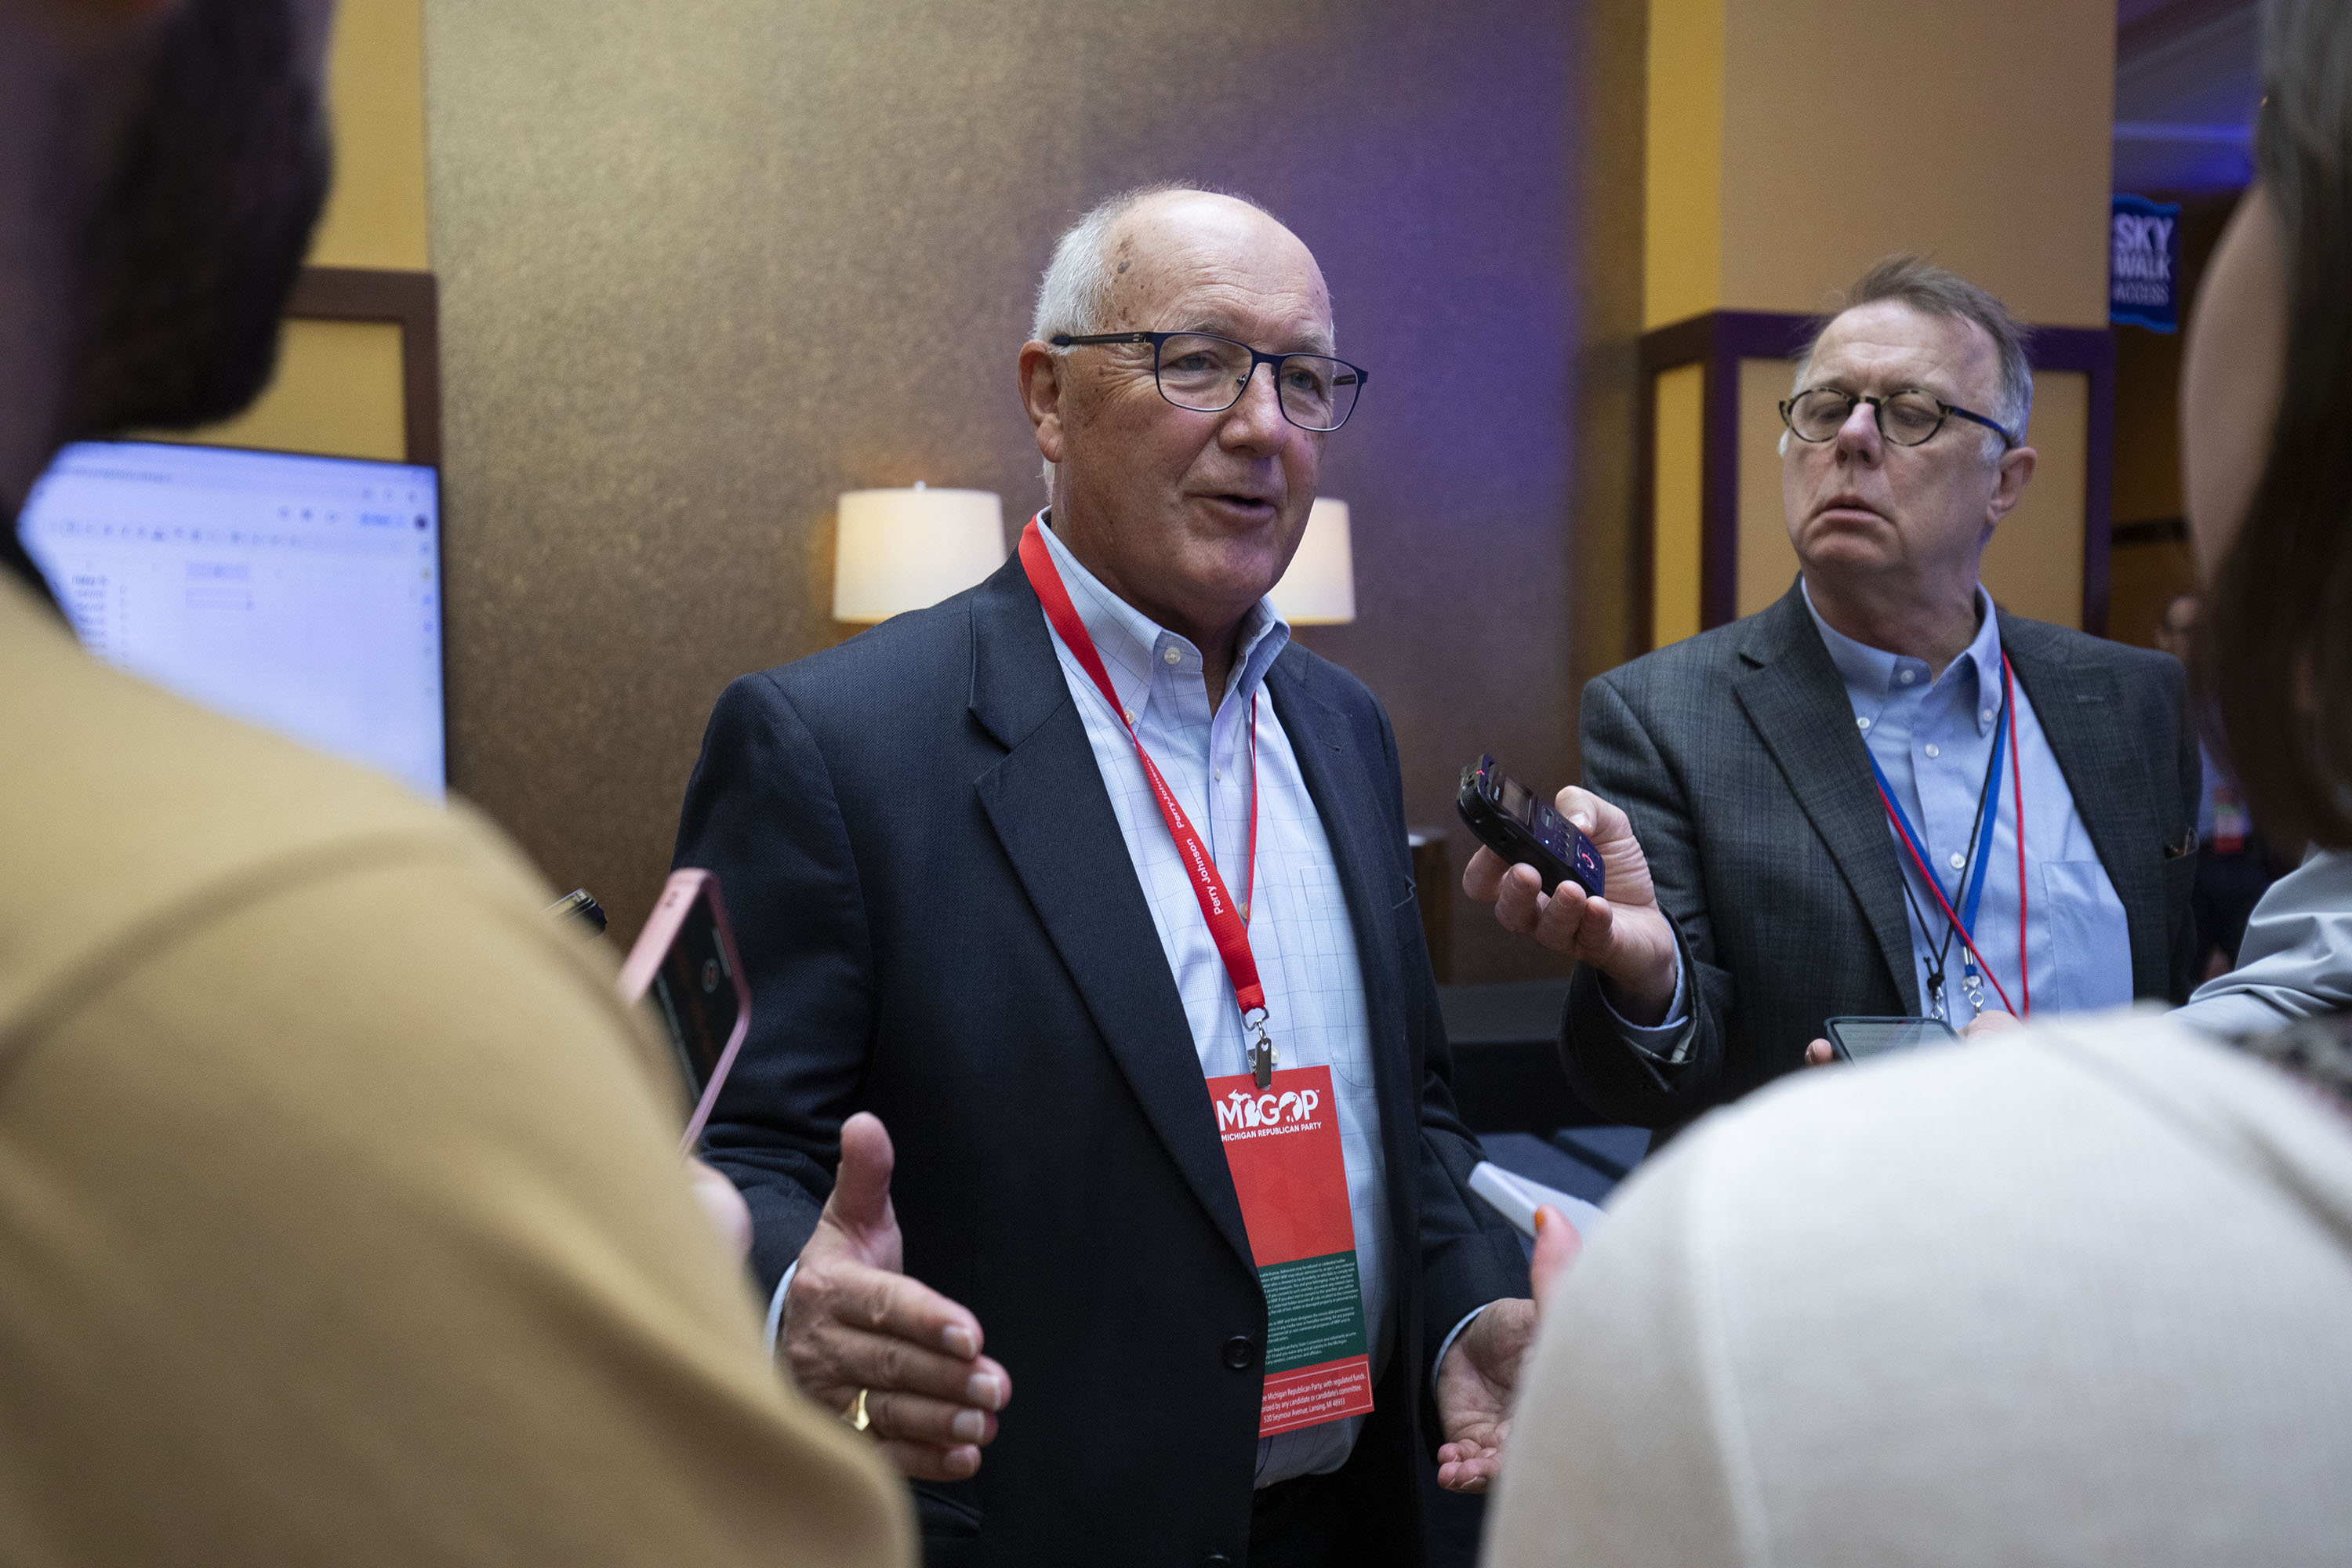 Pete Hoekstra, chairman of the Michigan Republican Party, speaks with reporters at a GOP convention in Grand Rapids, Michigan, on March 2.